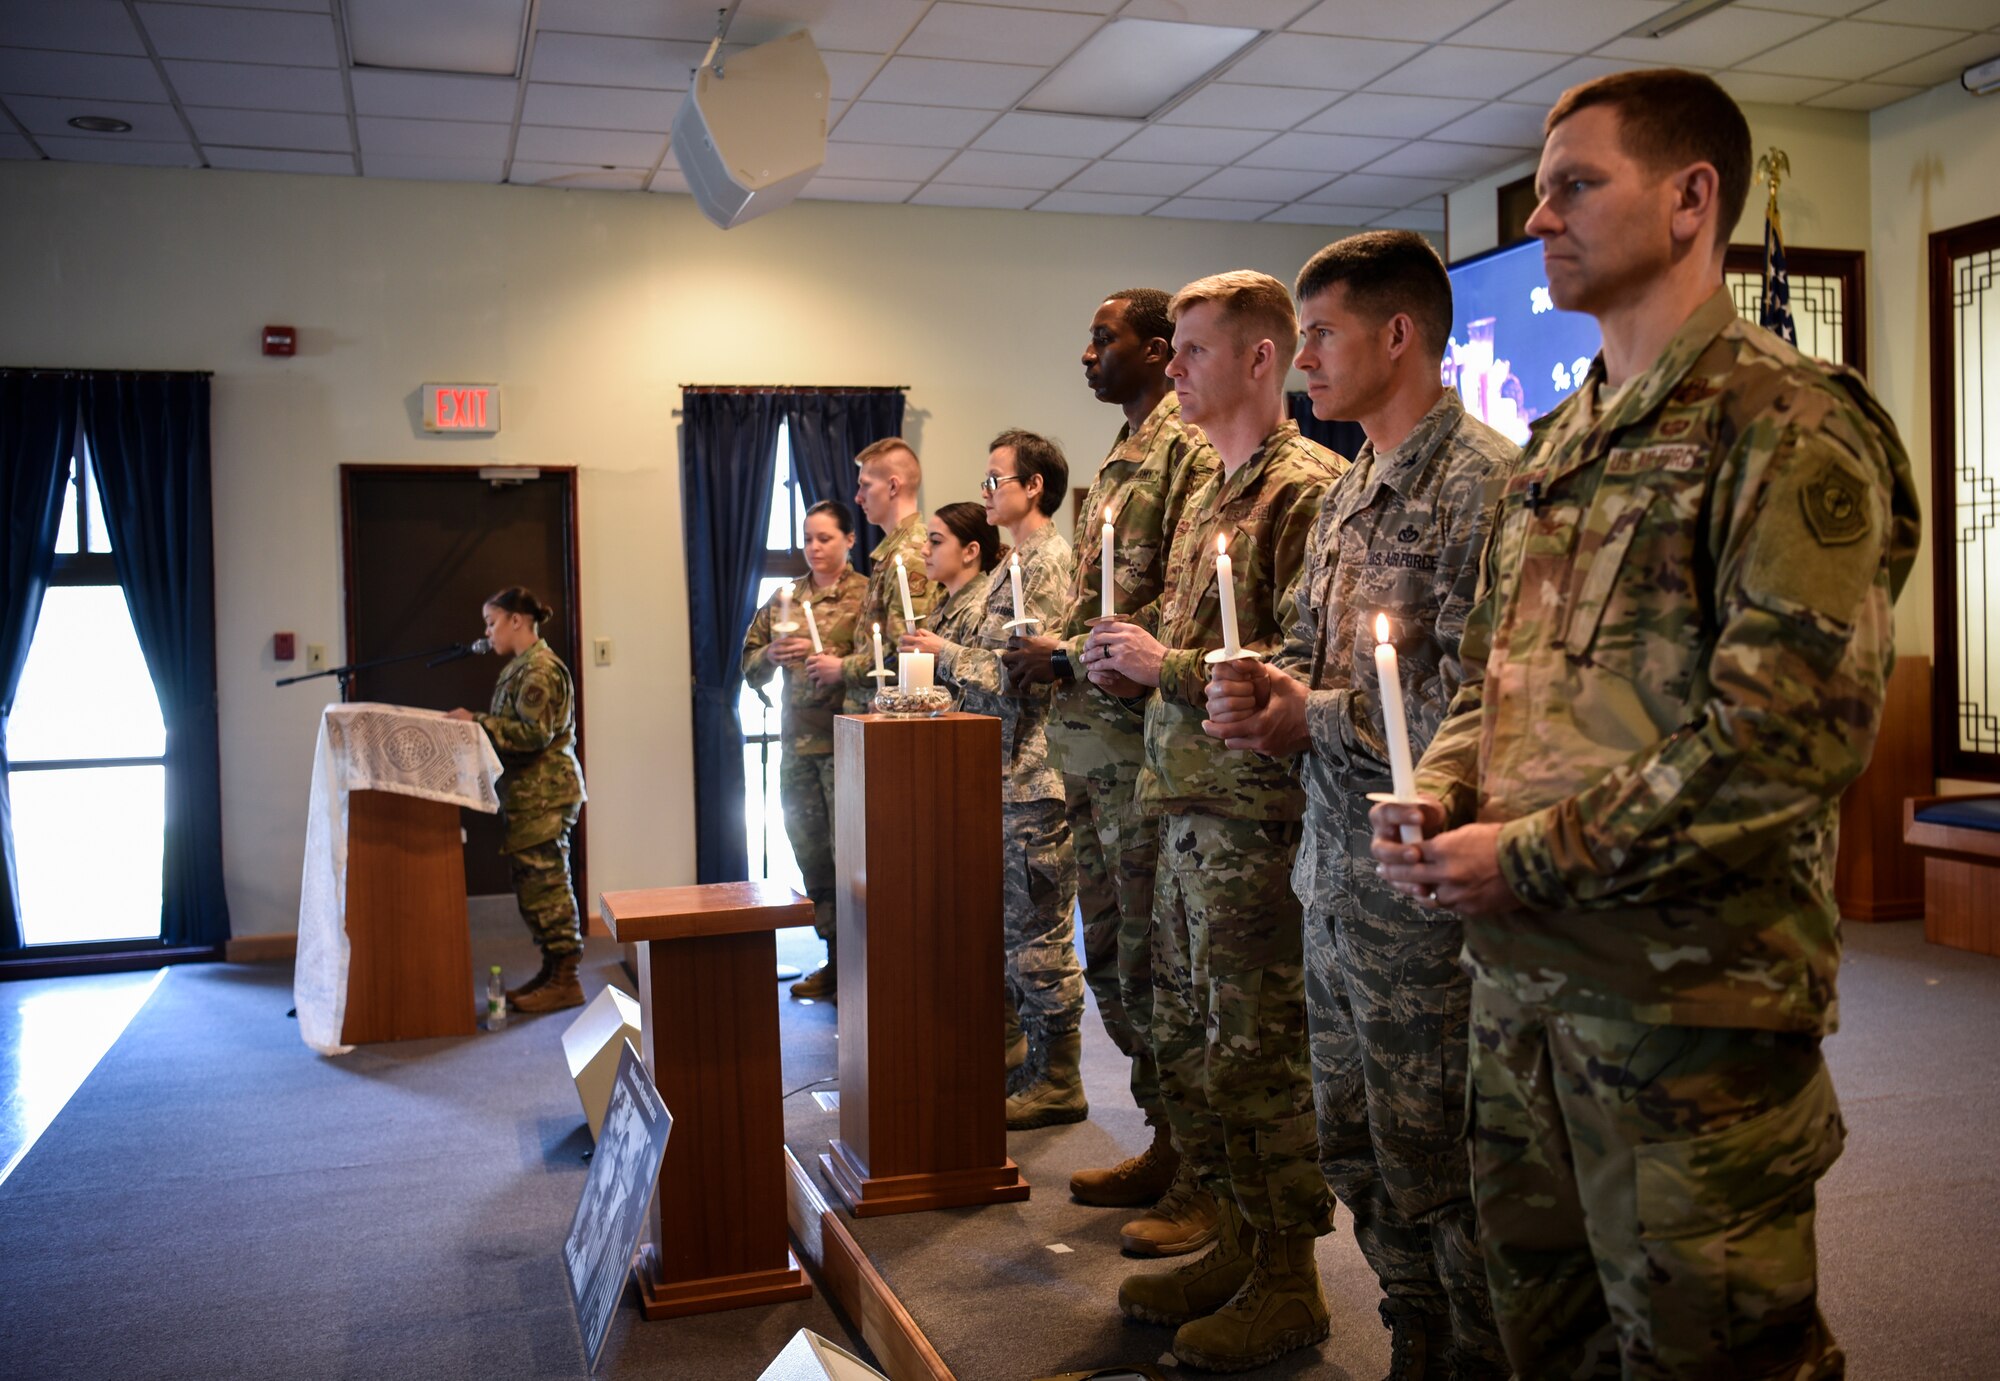 Airmen hold candles to commemorate Holocaust victims and survivors during a remembrance ceremony on Kunsan Air Base, Republic of Korea, May 2, 2019. The theme of this year’s remembrance is “Learning from the Holocaust: Beyond Religious Boundaries,” and while many Holocaust victims were in fact Jewish, other innocent targets included Polish, Africans, Muslims, and people with disabilities. (U.S. Air Force photo by Capt. Remoshay Nelson)